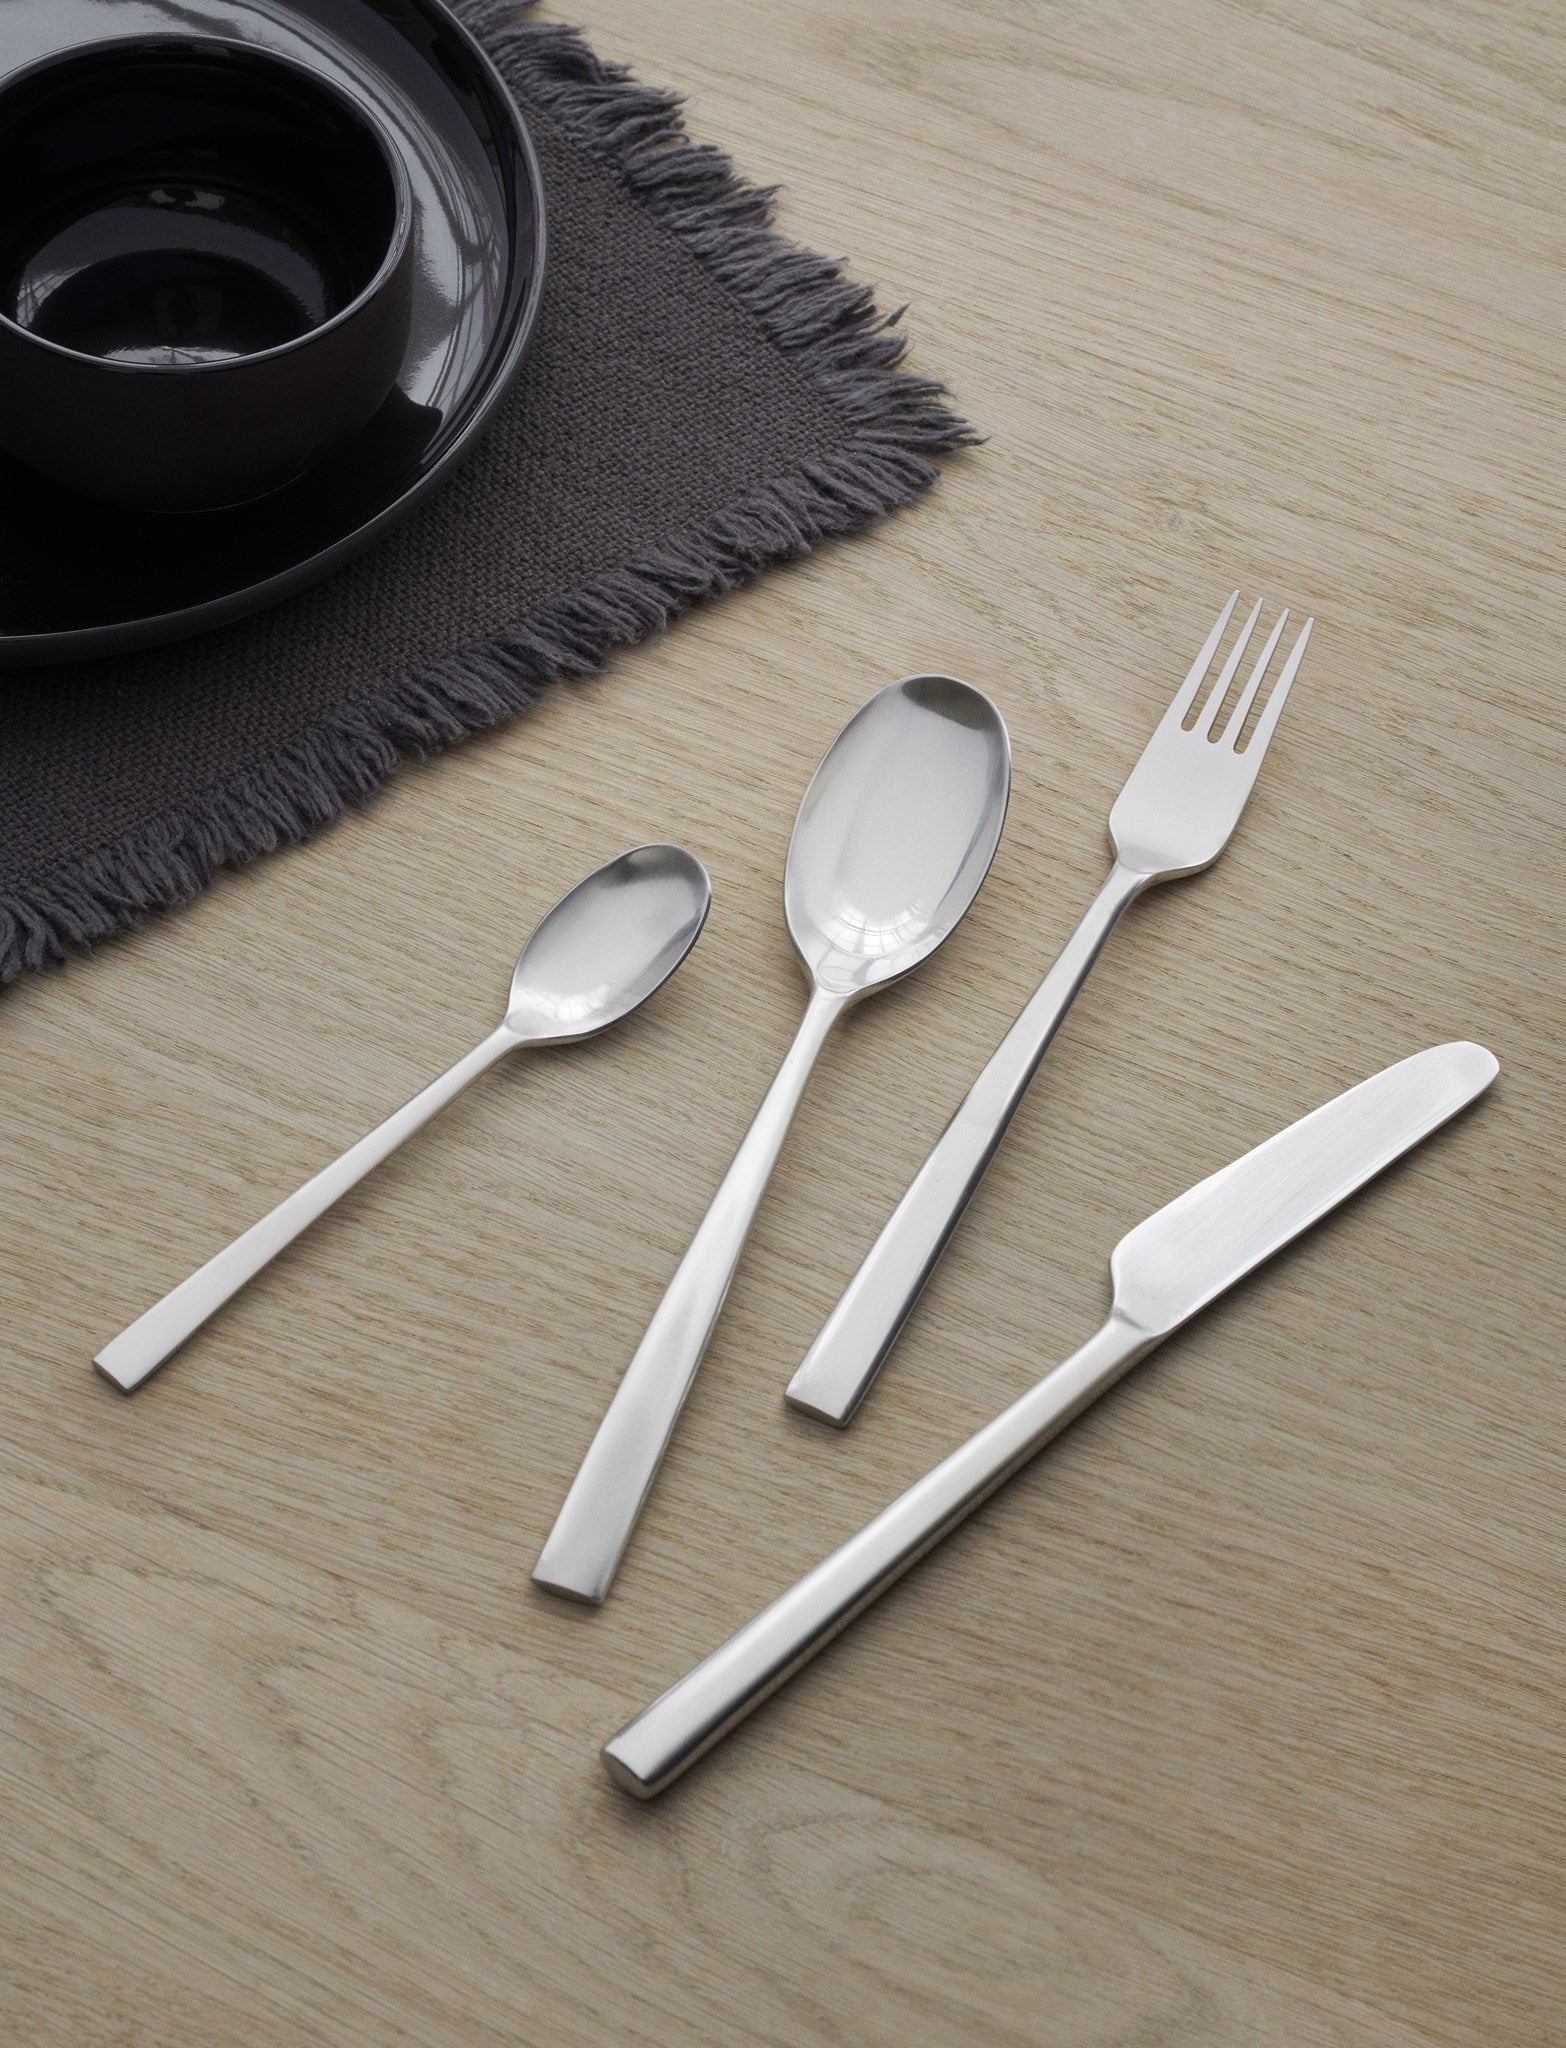 Stelton Chaco Table Knife